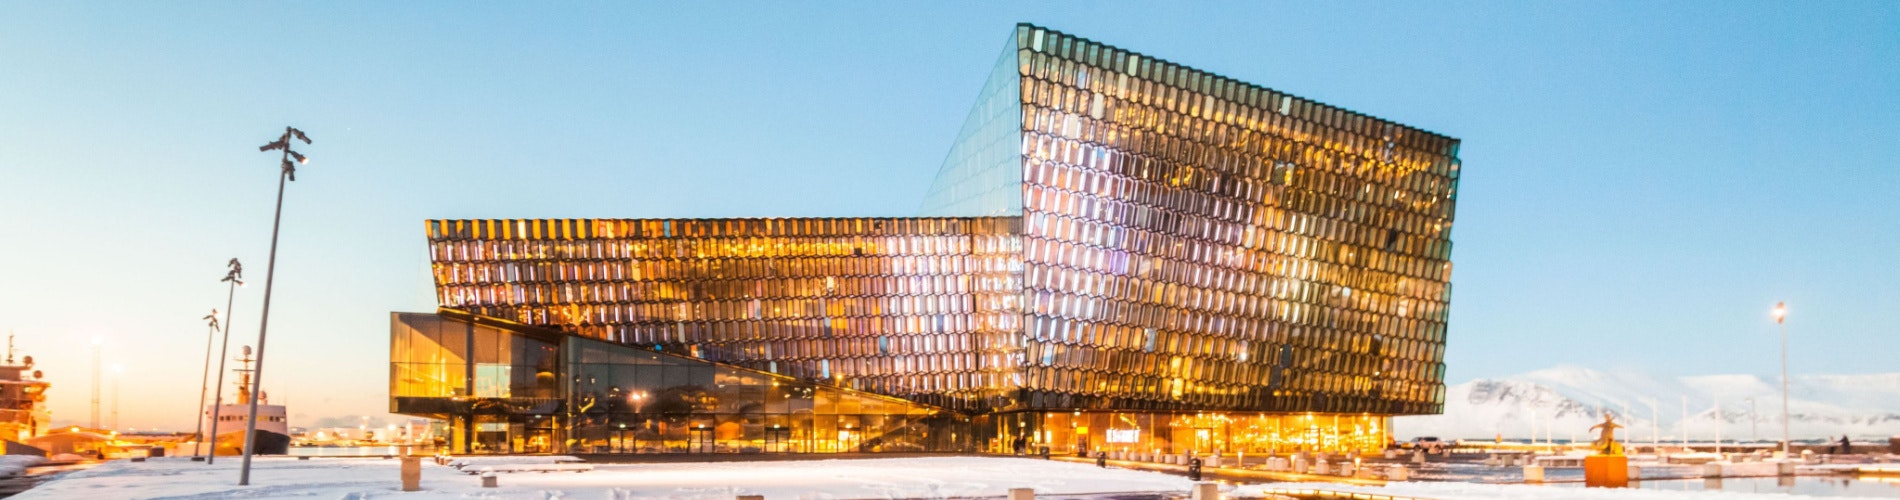 Harpa Concert Hall in Reykjavik, Iceland on a winter's day